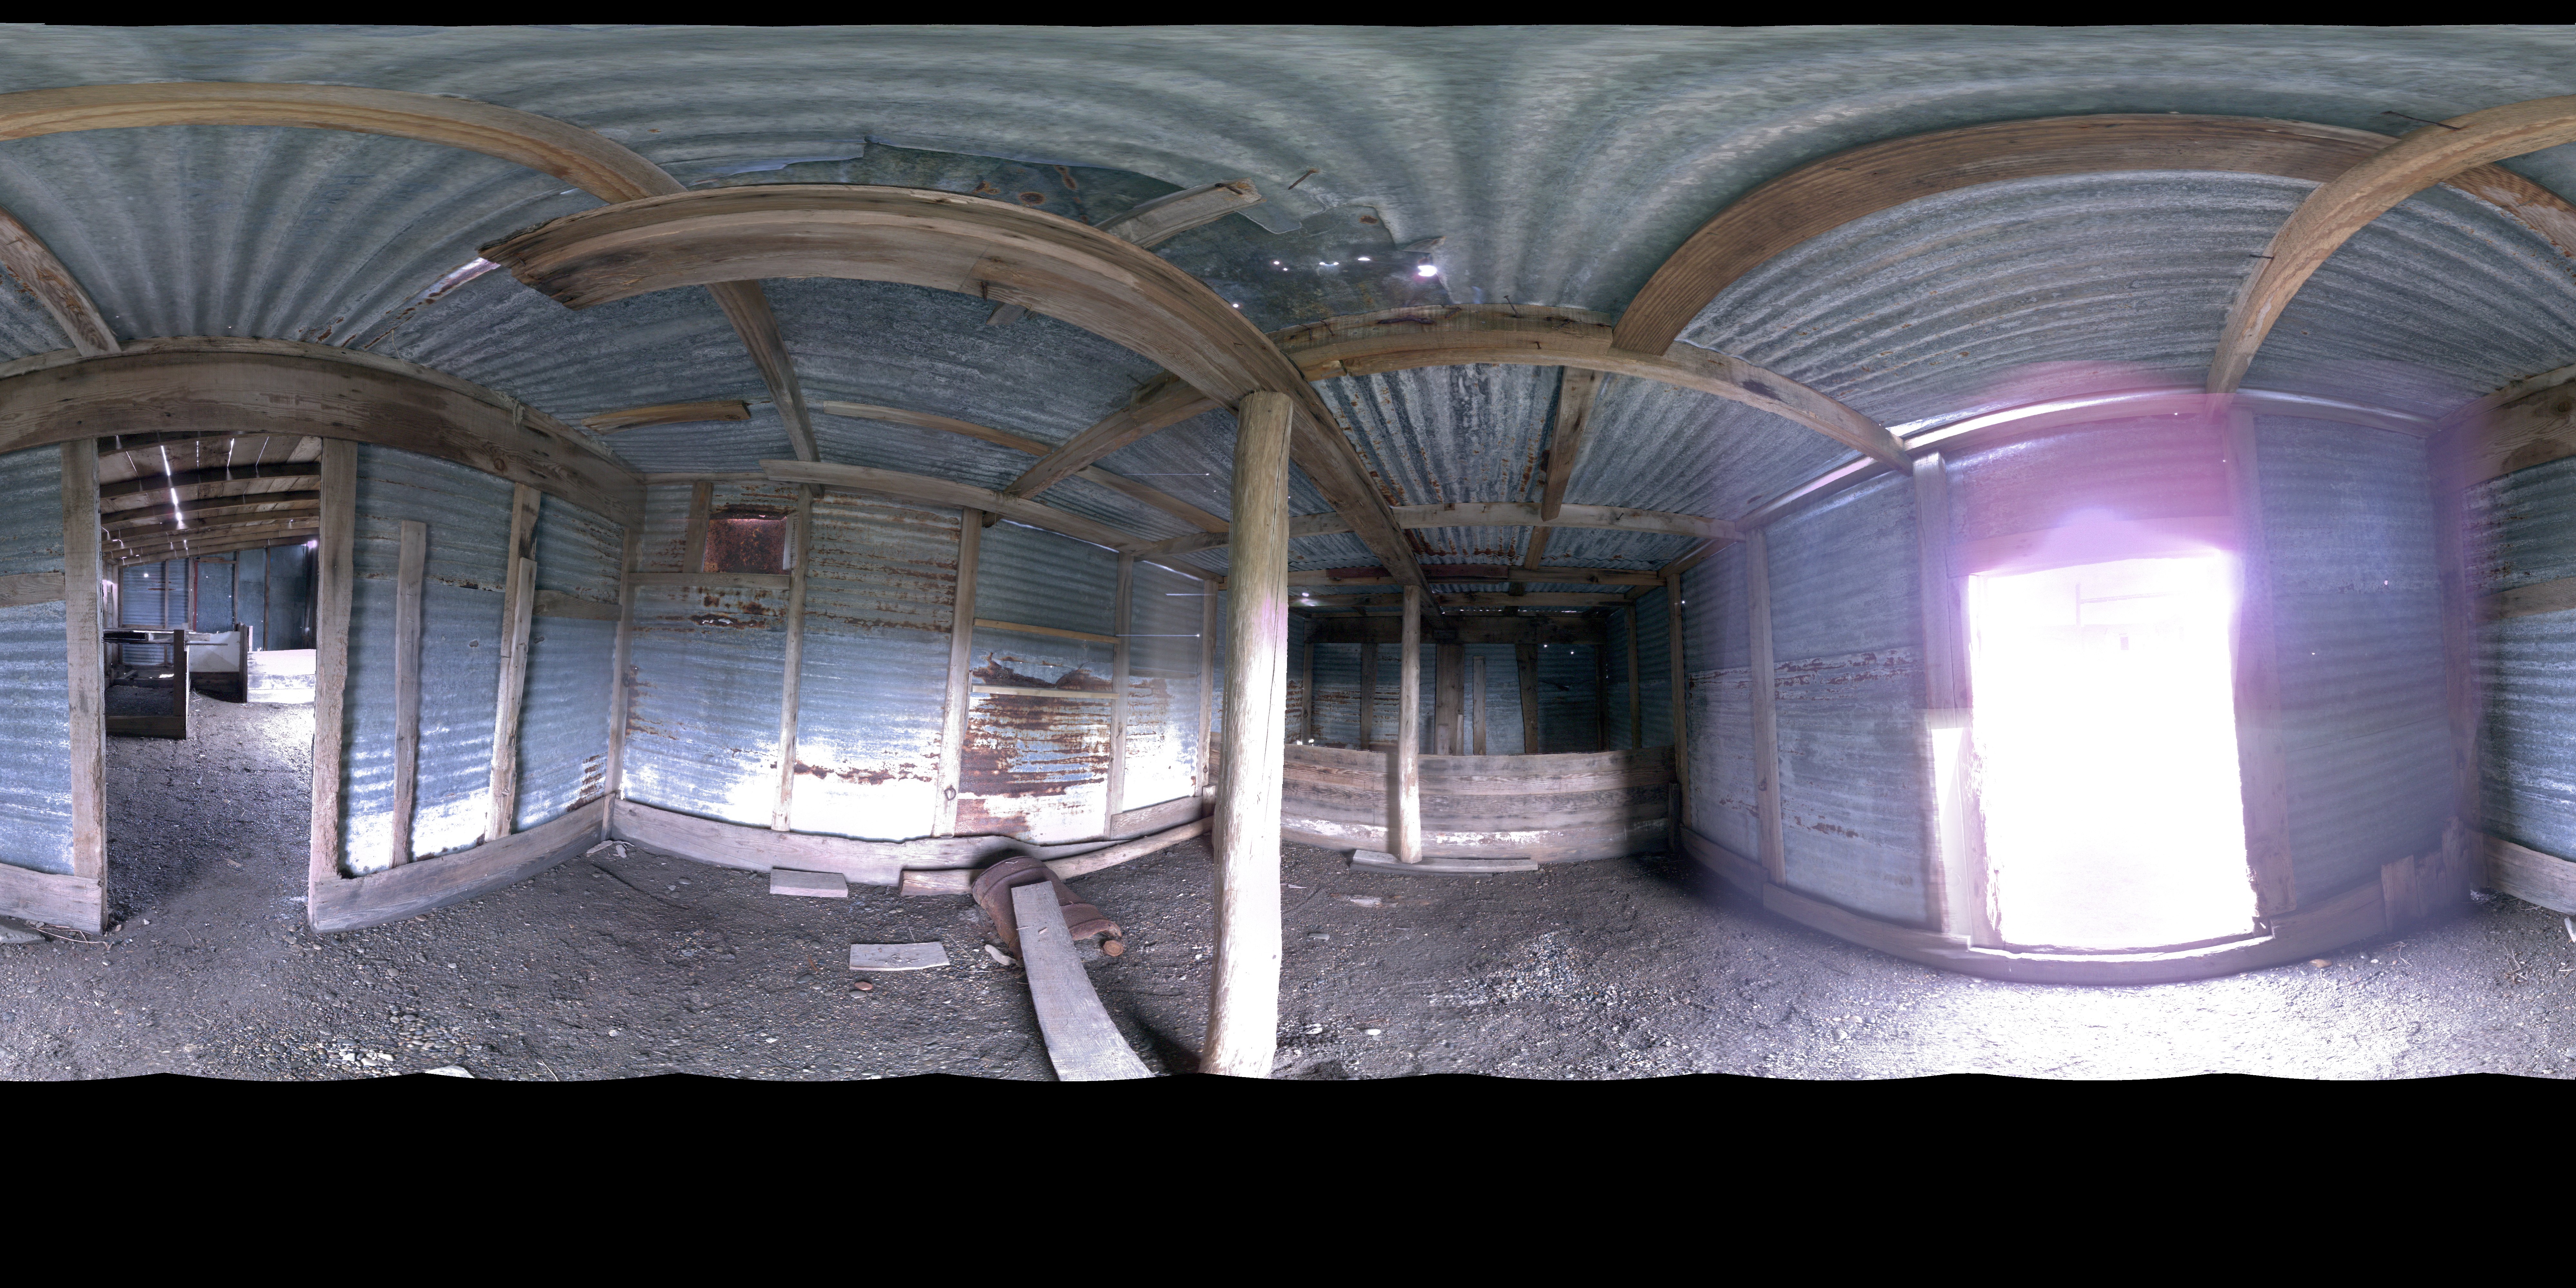 Panoramic view of the RCMP Dog Kennels and Run from the Leica BKL 360, scanning location 6.